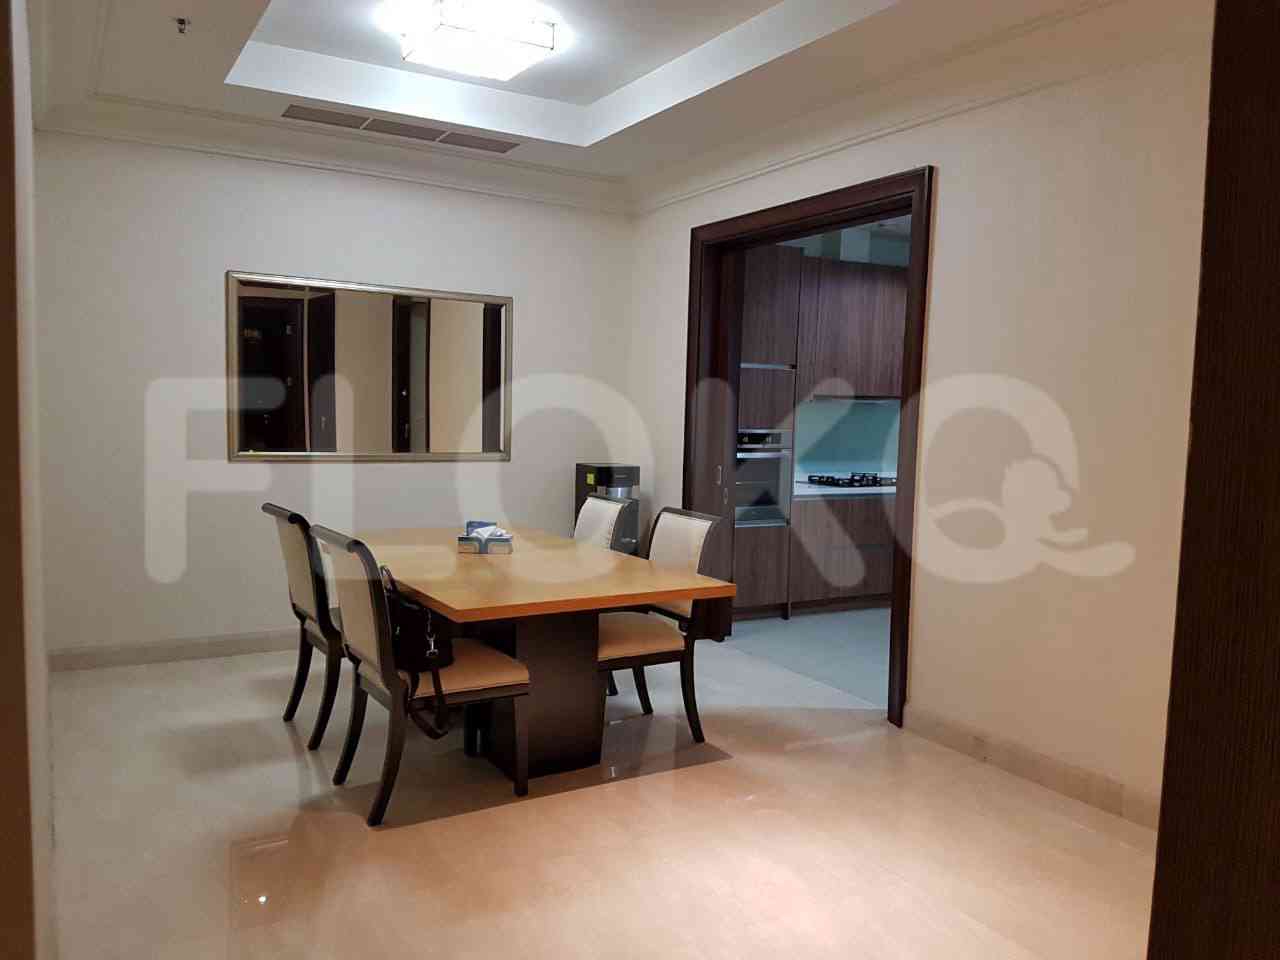 2 Bedroom on 15th Floor for Rent in Pakubuwono View - fga252 6